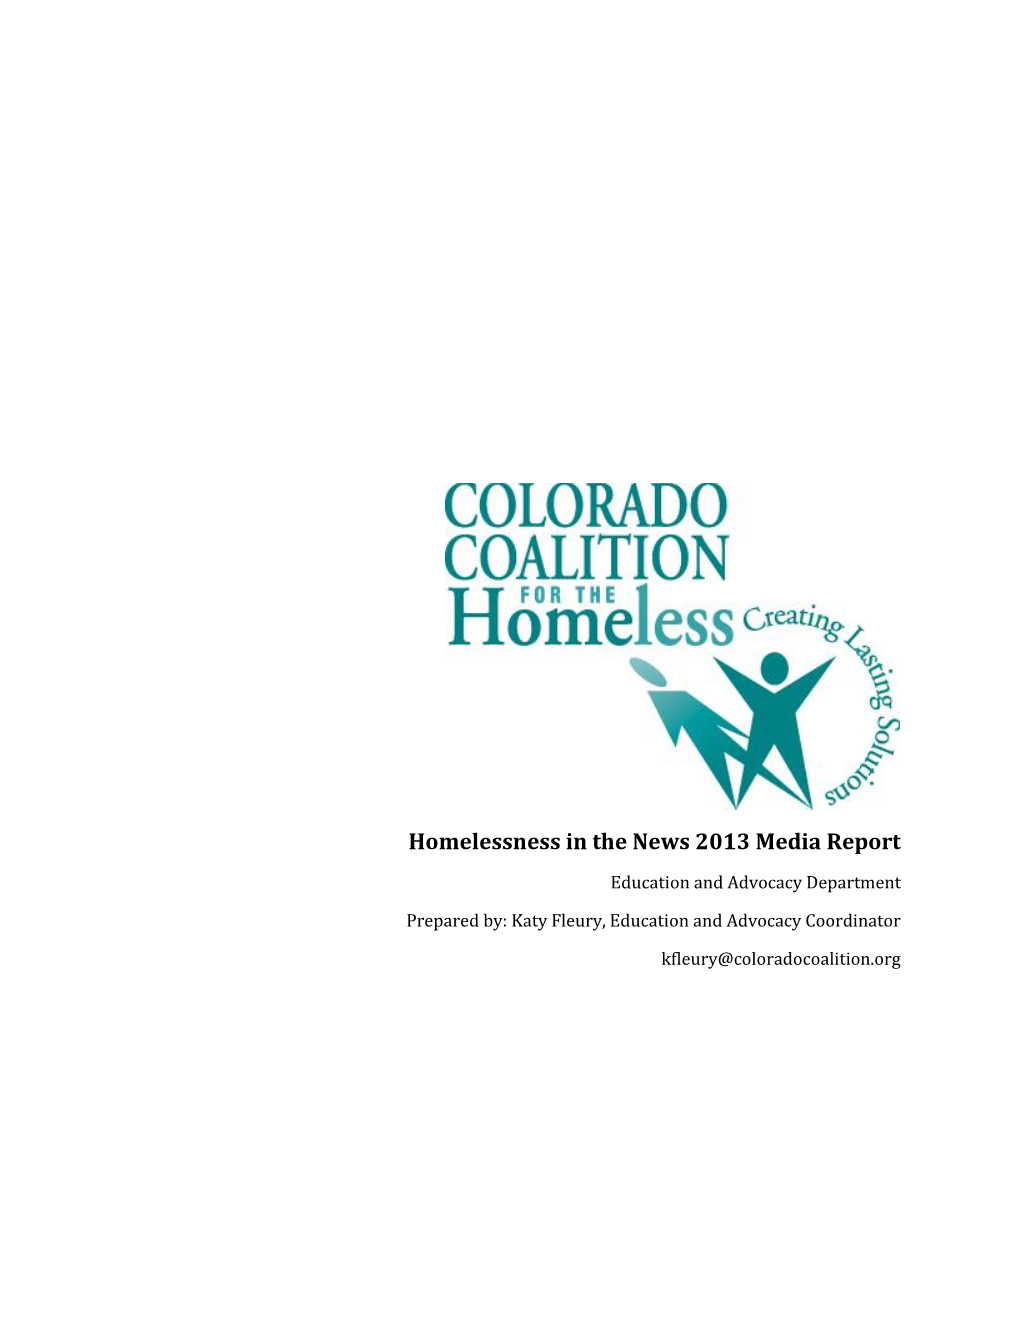 Homelessness in the News 2013 Media Report